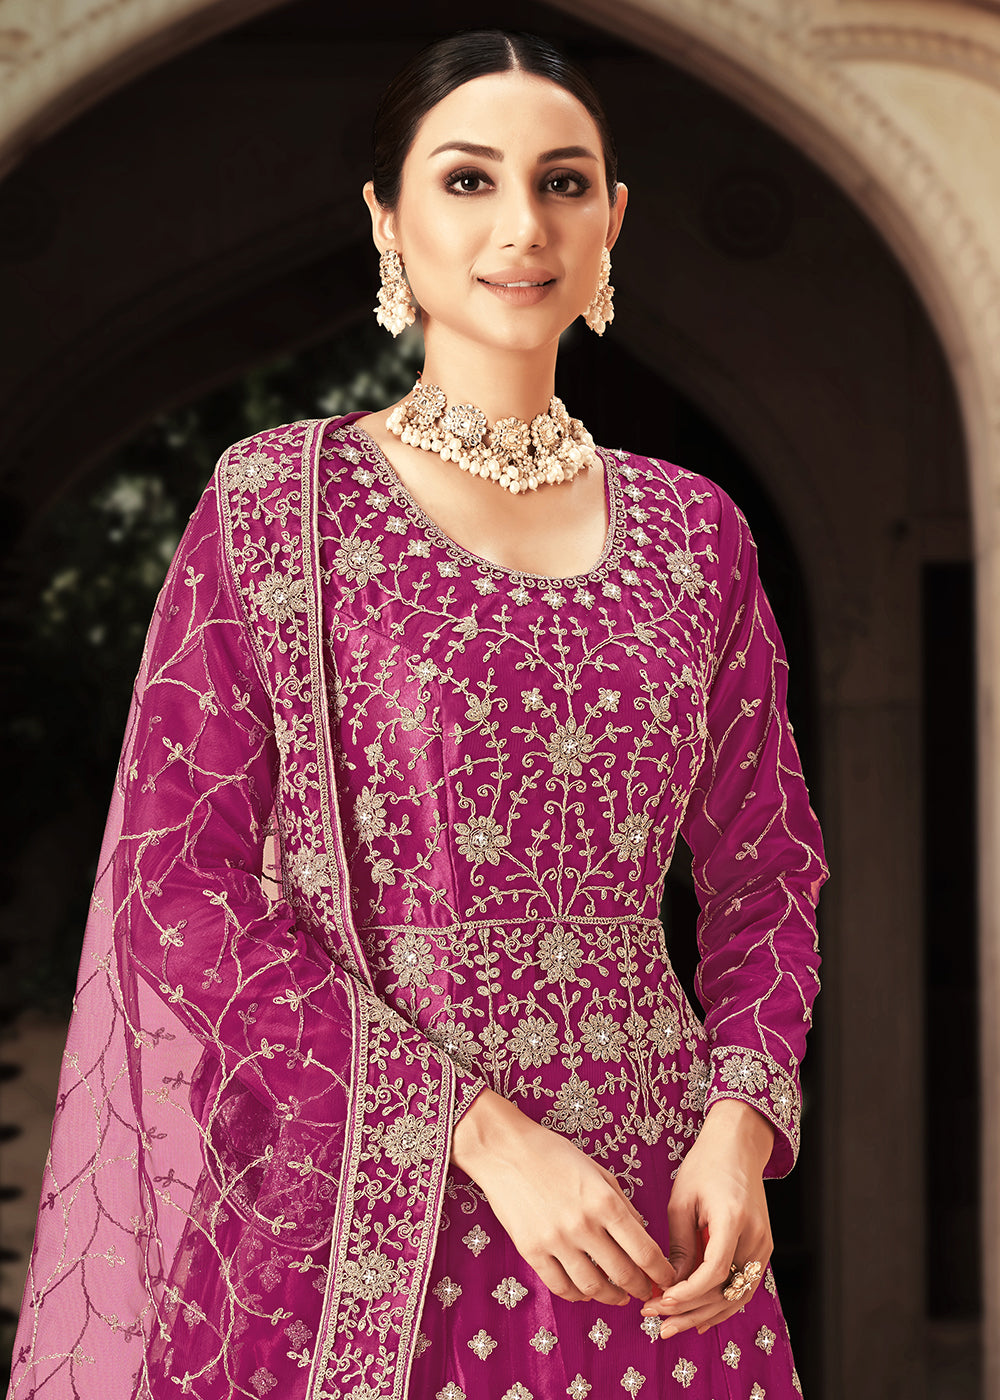 Buy Now Magenta Zarkan Diamond Embroidered Bridal Anarkali Suit Online in Canada at Empress Clothing. 